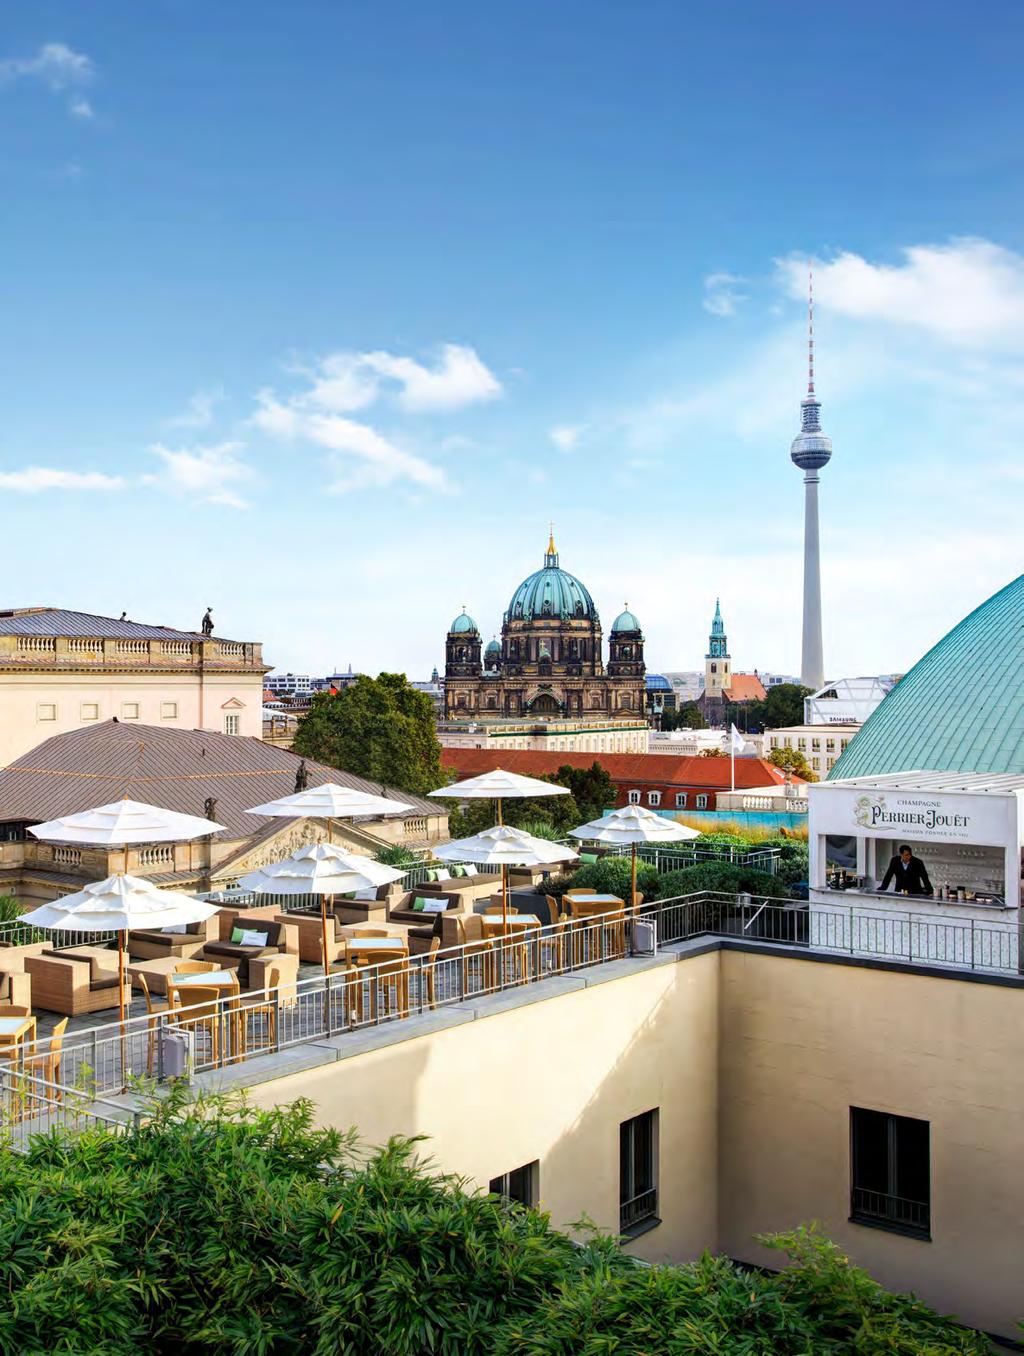 An elegant outpost in the centre of up-all-night Berlin. A relaxed hideaway in the animated Mitte District. A grand bank on Bebelplatz transformed into an intimate, artistic hotel: Hotel de Rome.